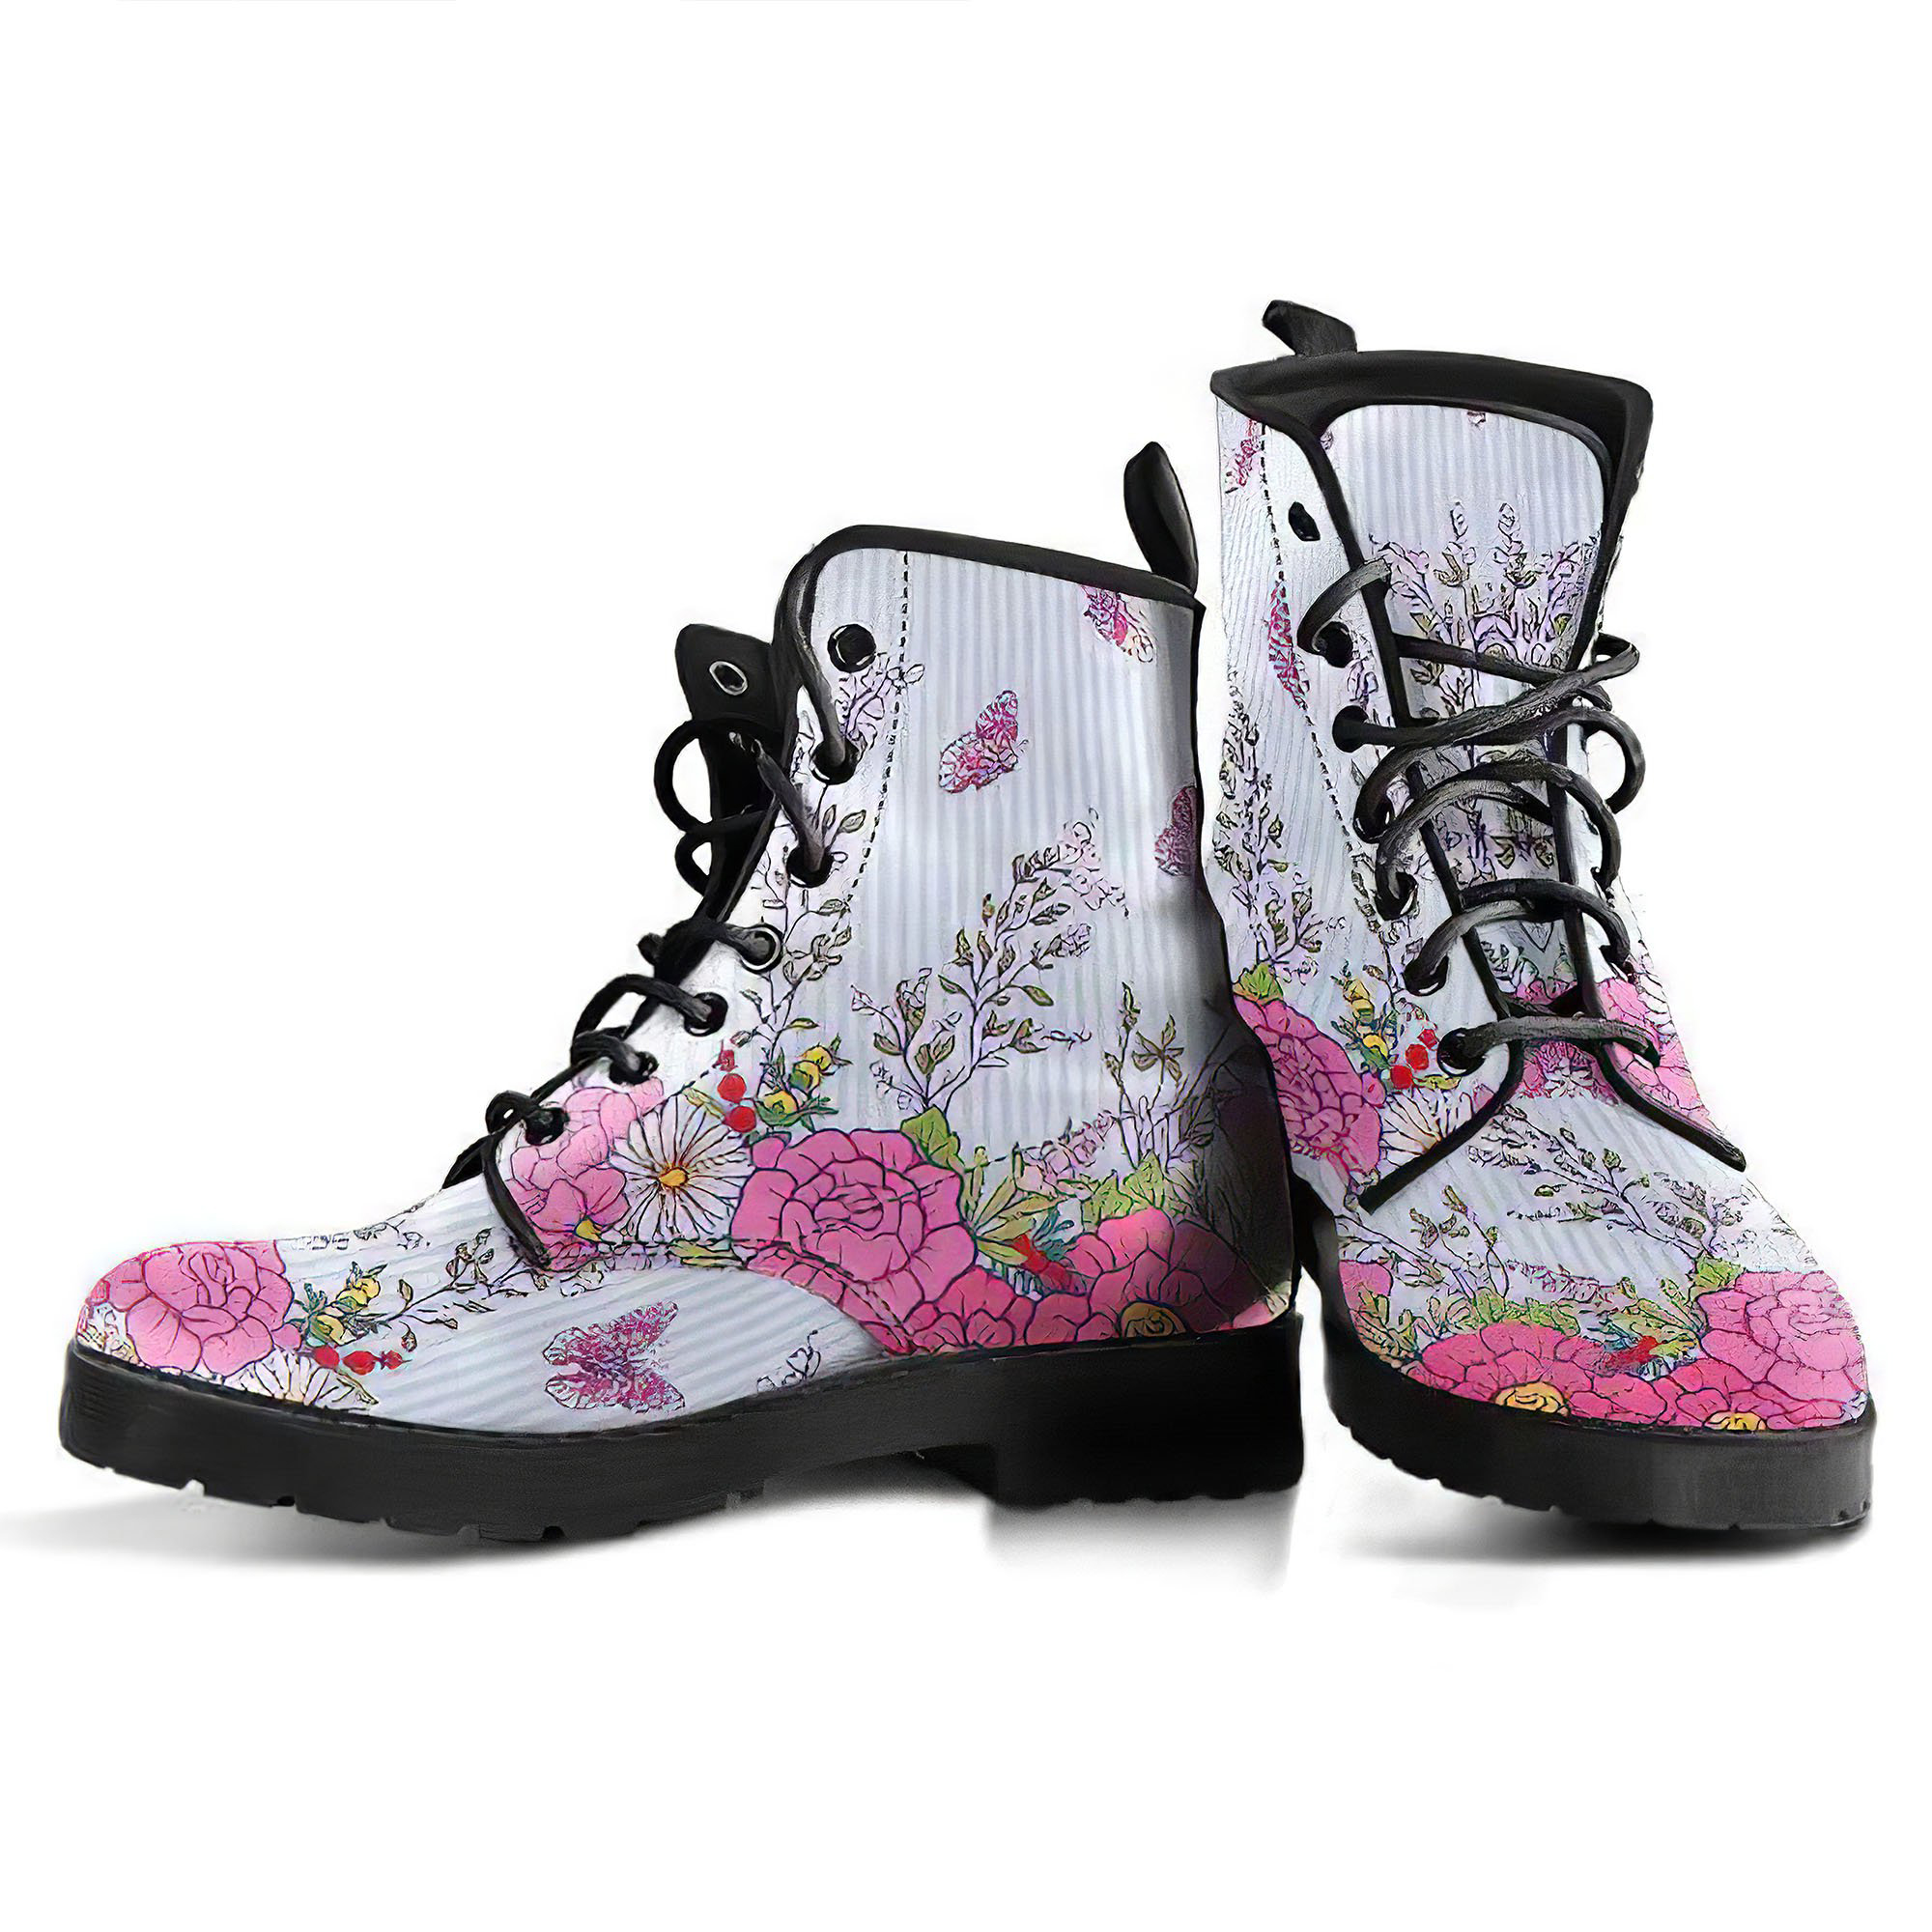 butterfly-flower-handcrafted-boots-gp-main.jpg